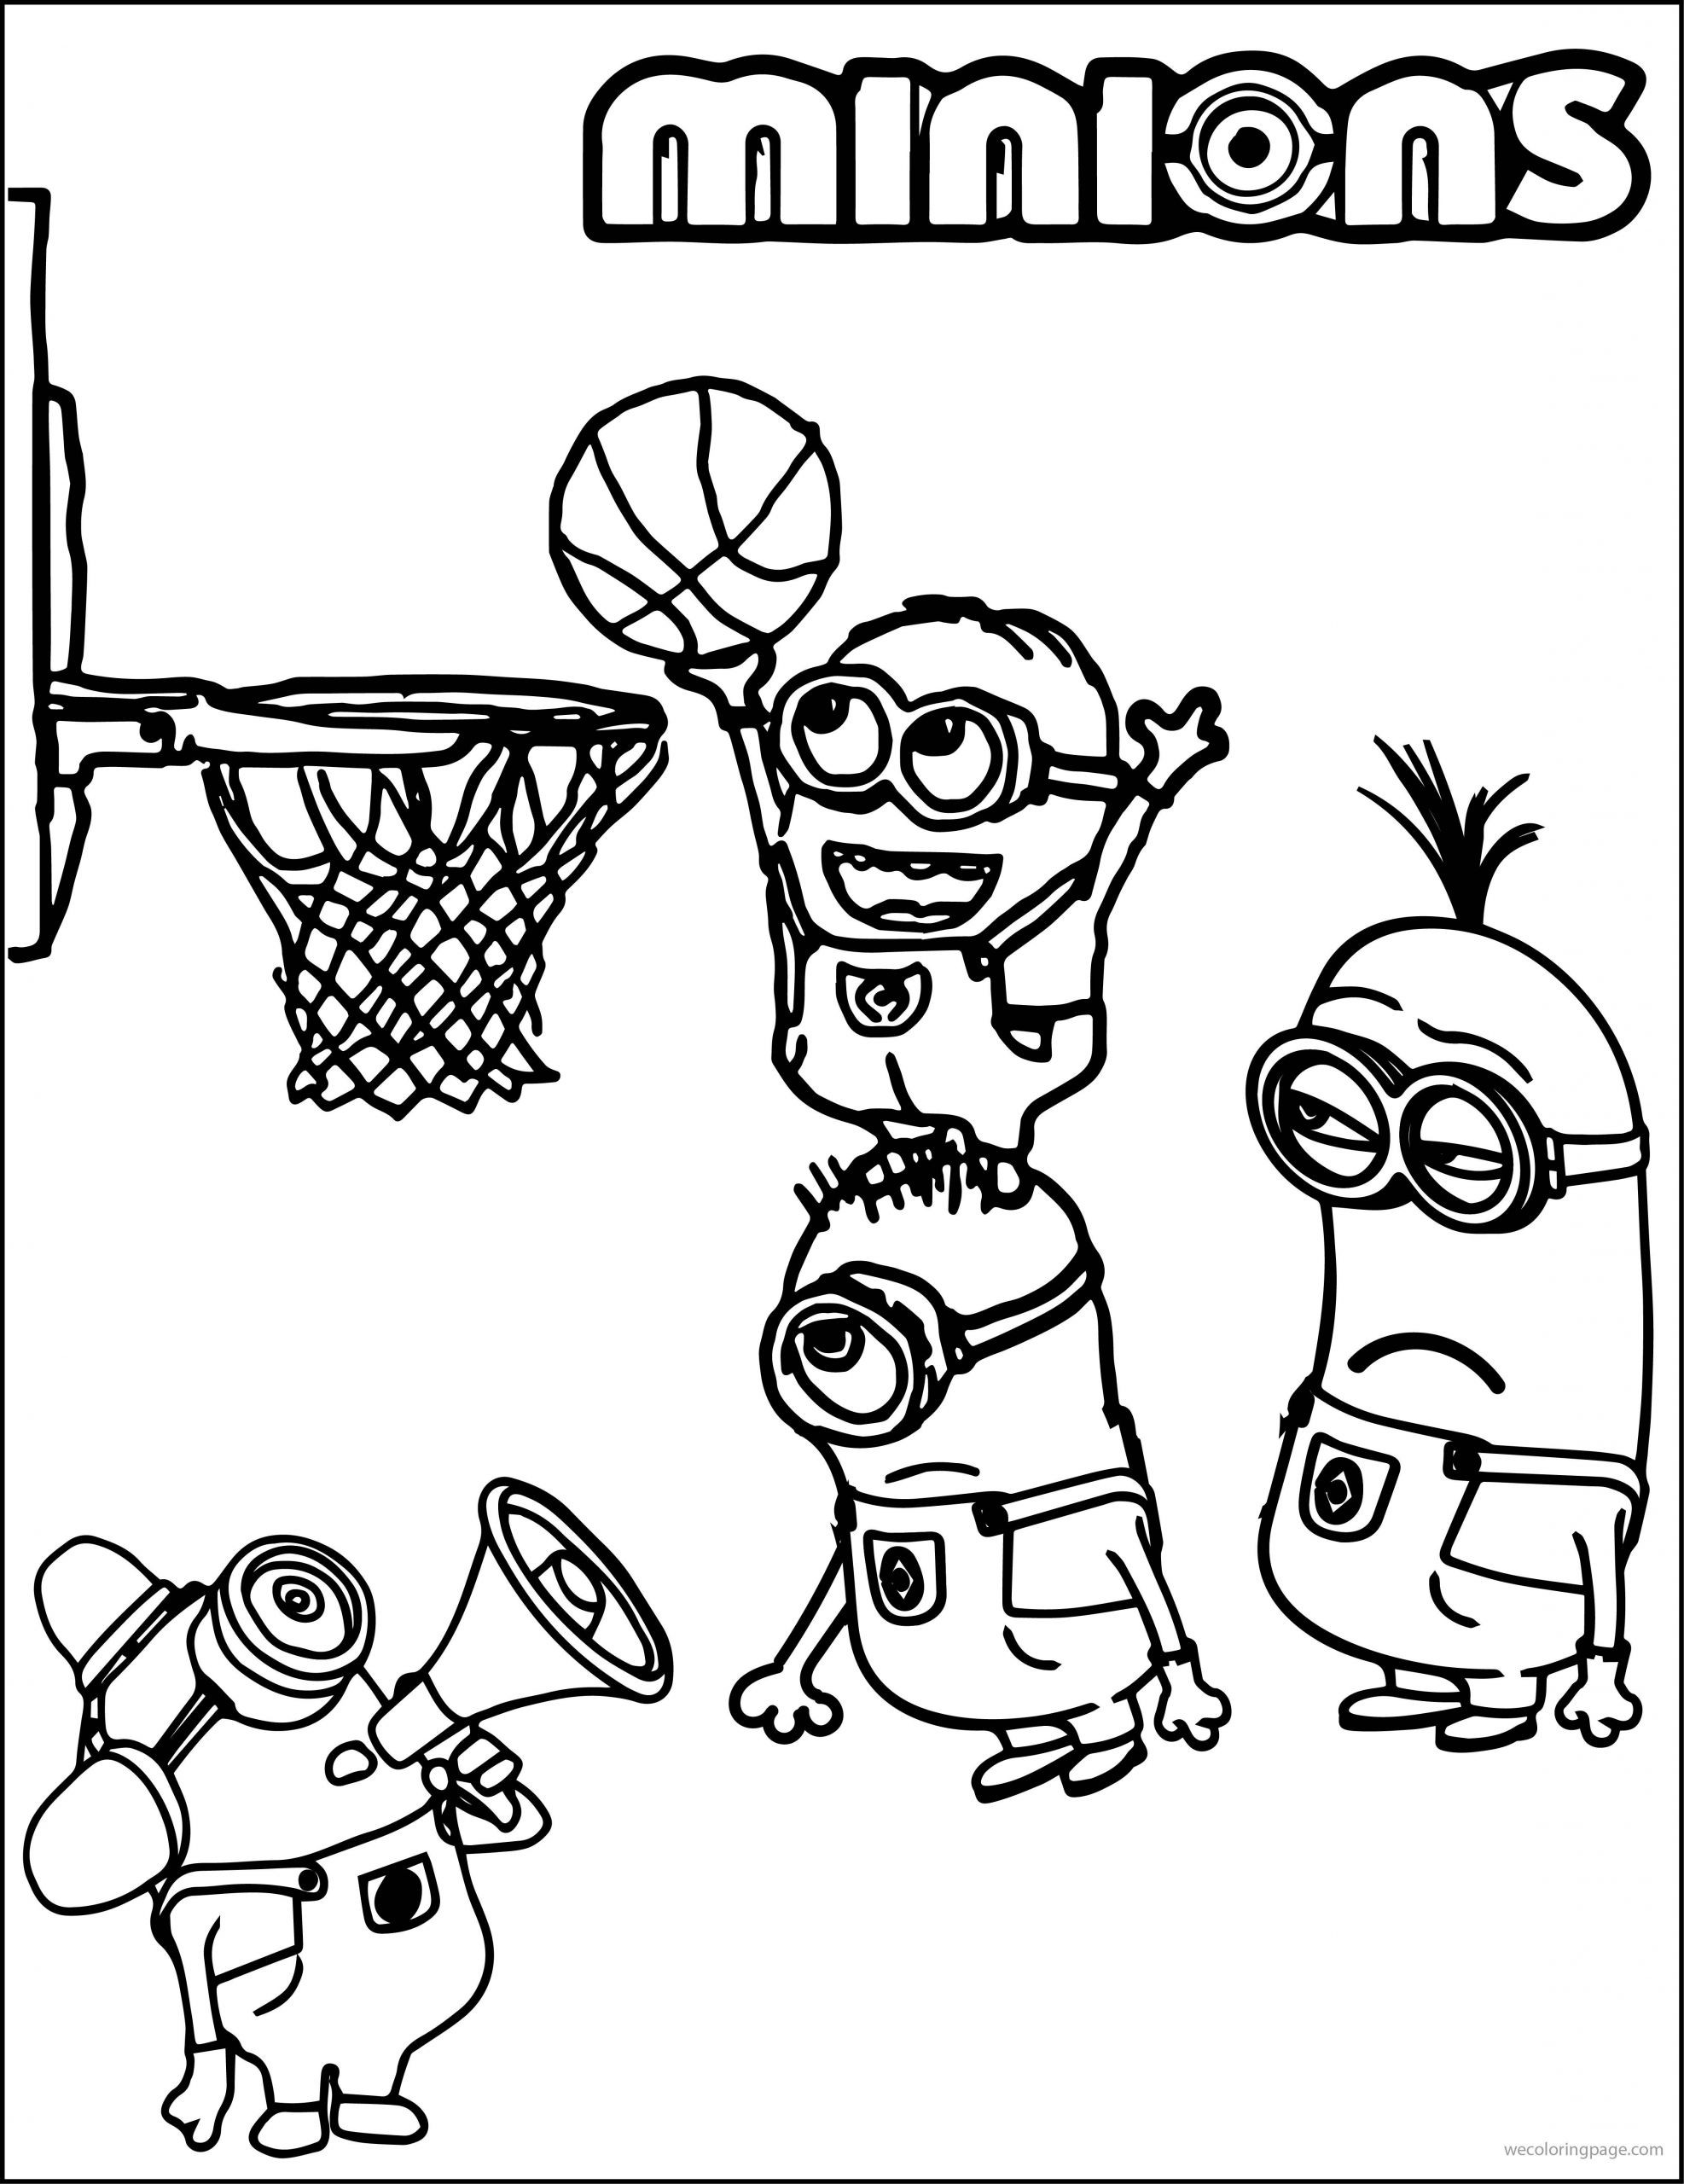 Free Coloring Pages For Boys Sports
 Minion Playing Basketball Coloring Pages